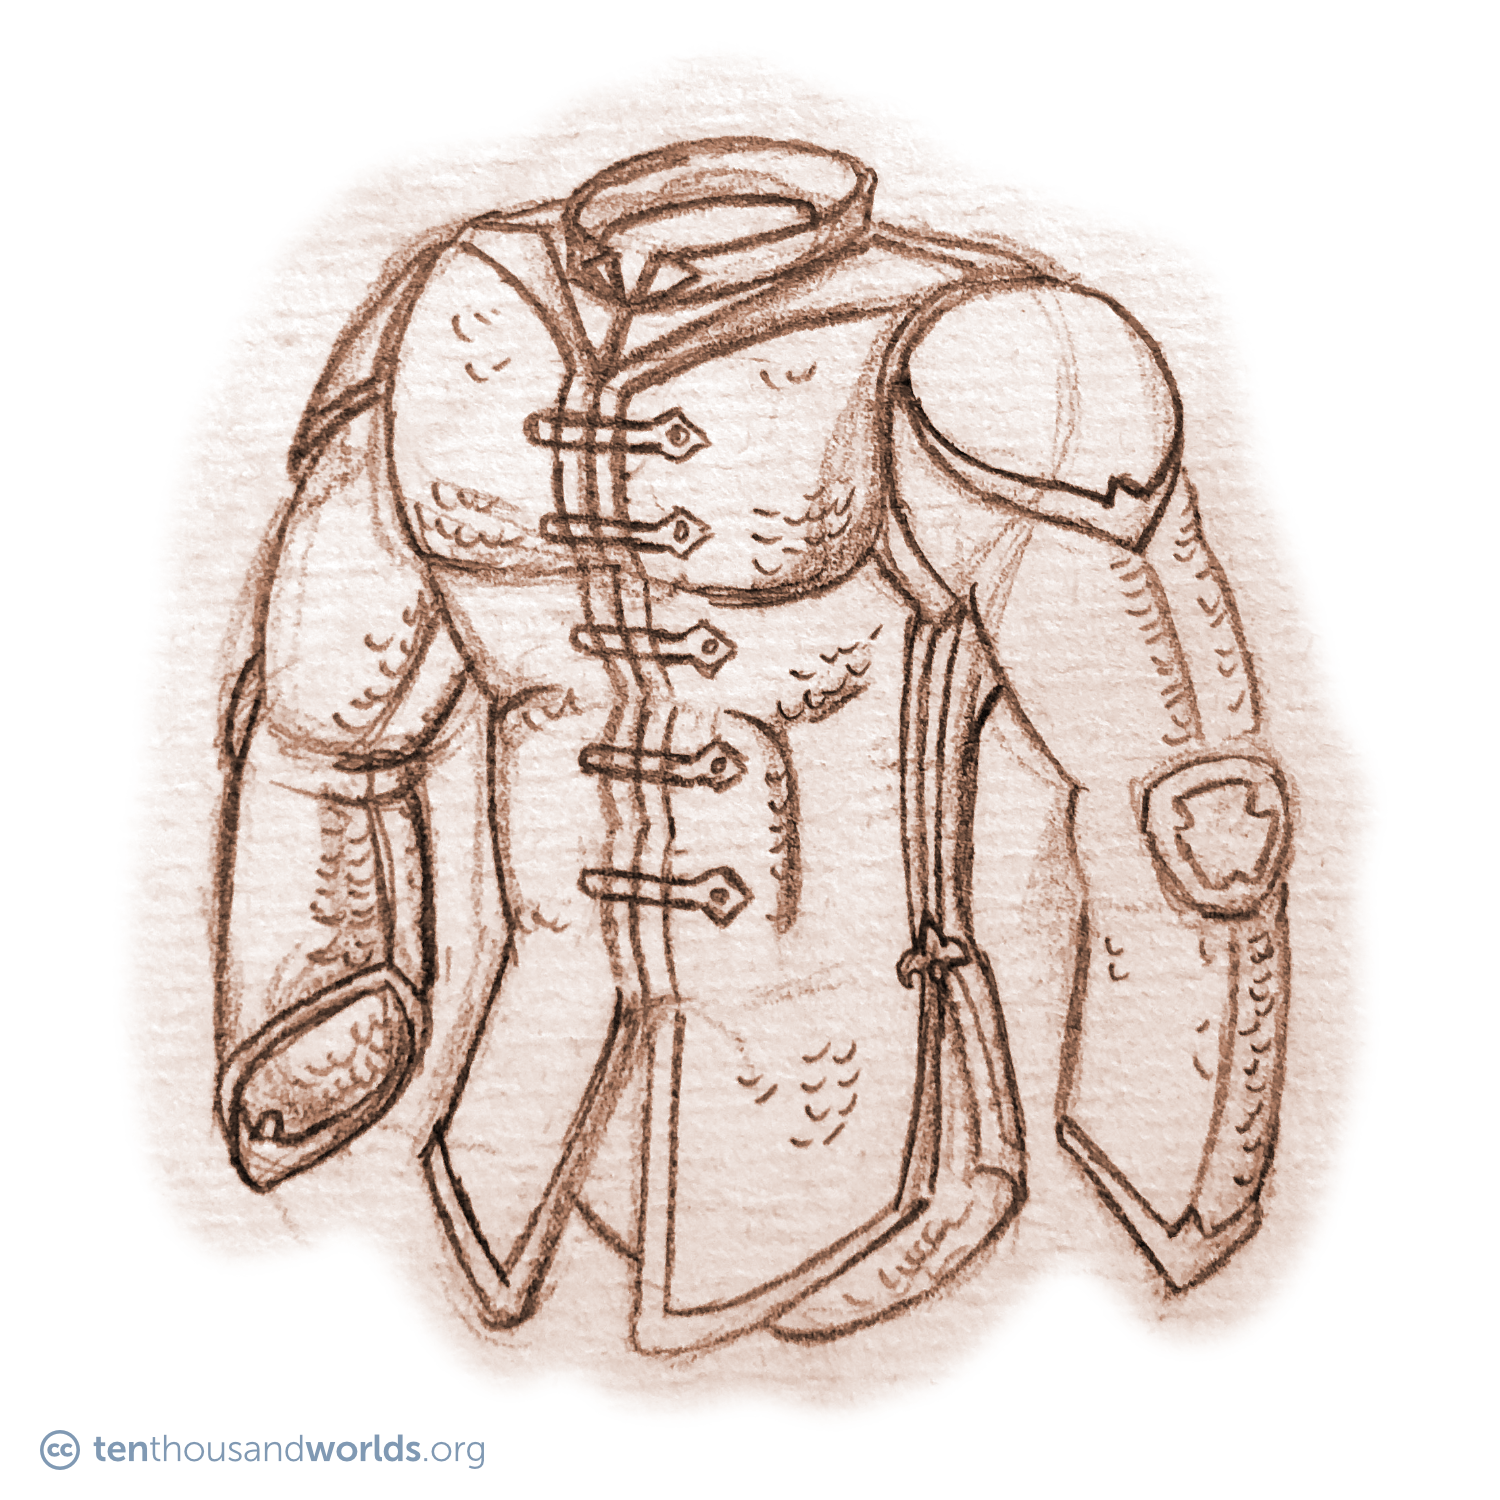 A pencil sketch of a shirt of scale mail with decorative trim and fasteners, and large metal plates at the shoulders and elbows.